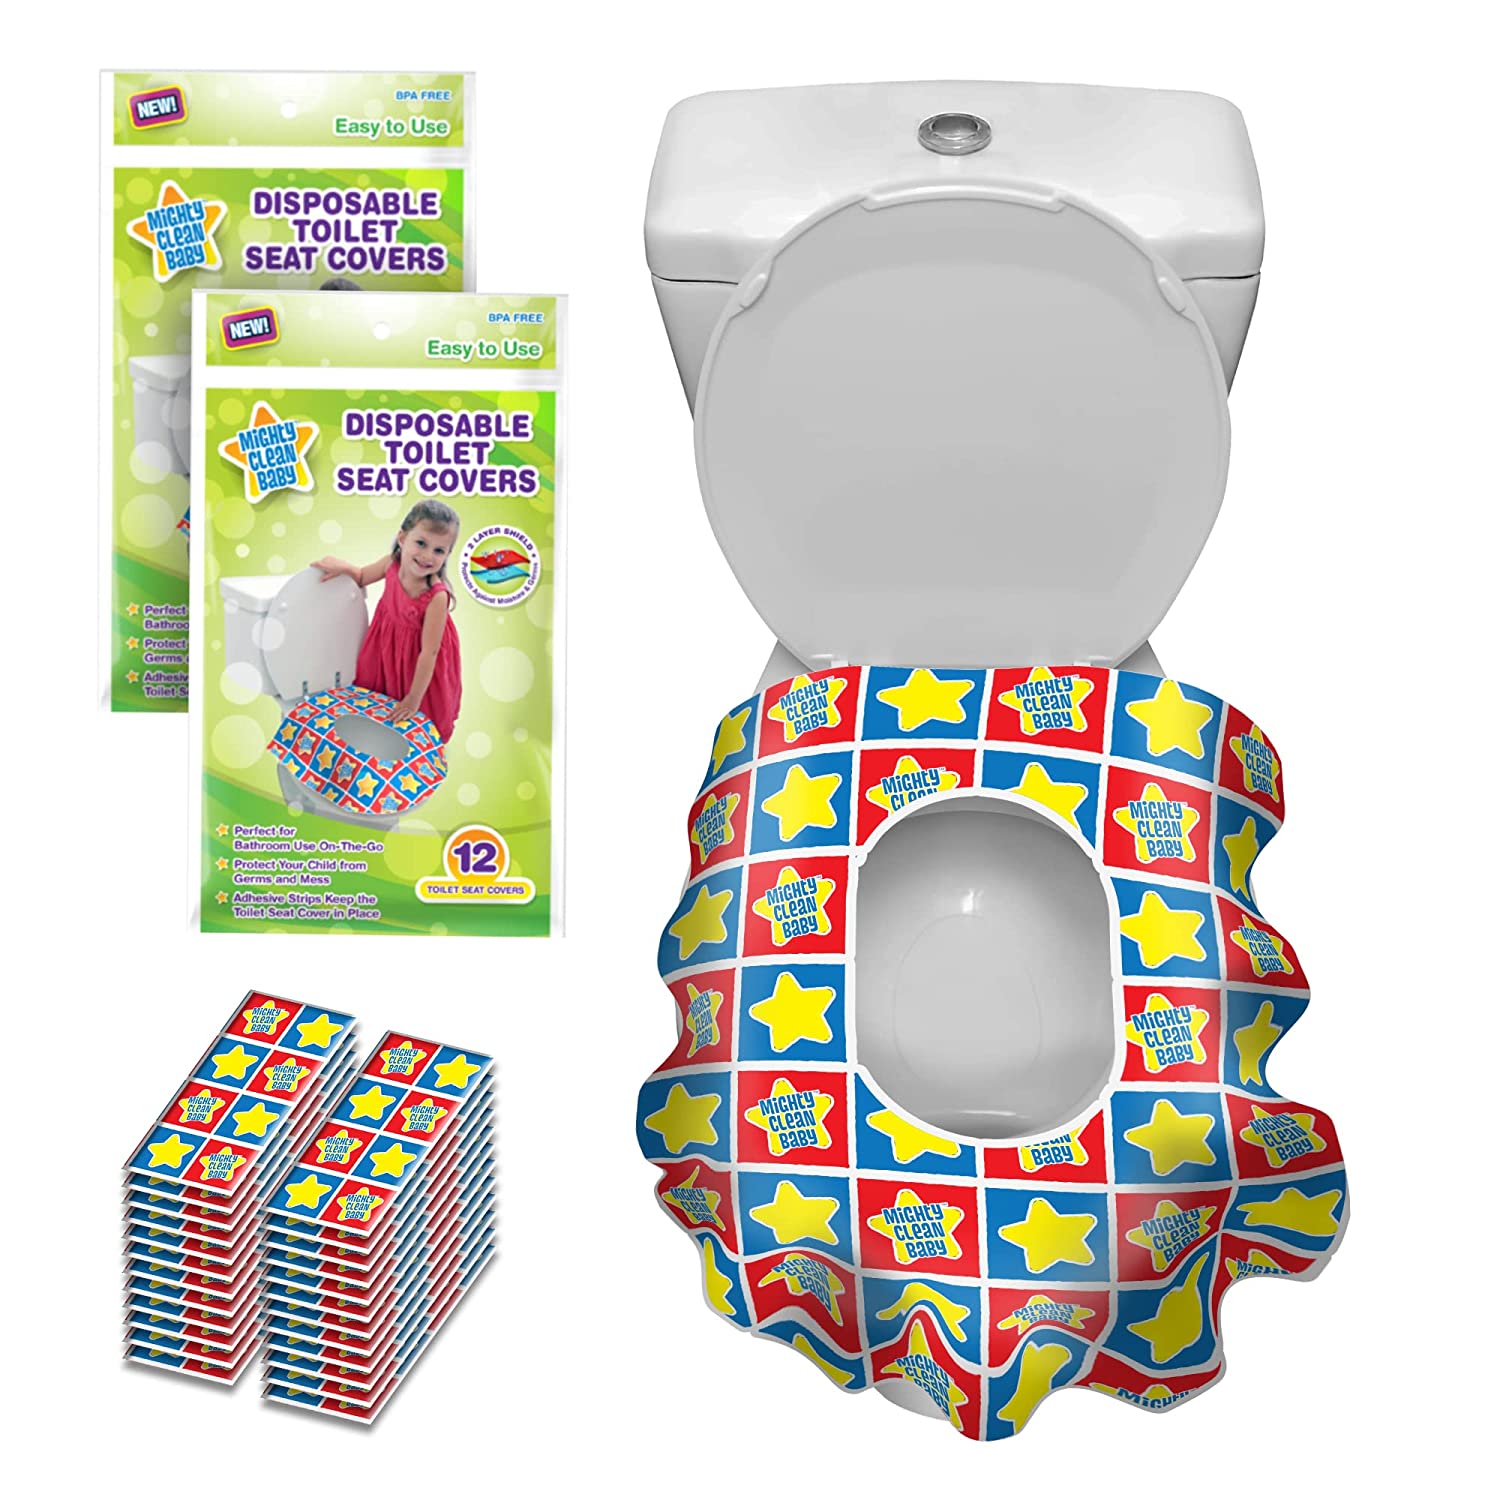 Mighty Clean Baby Children’s Disposable Toilet Seat Covers, 24-Pack